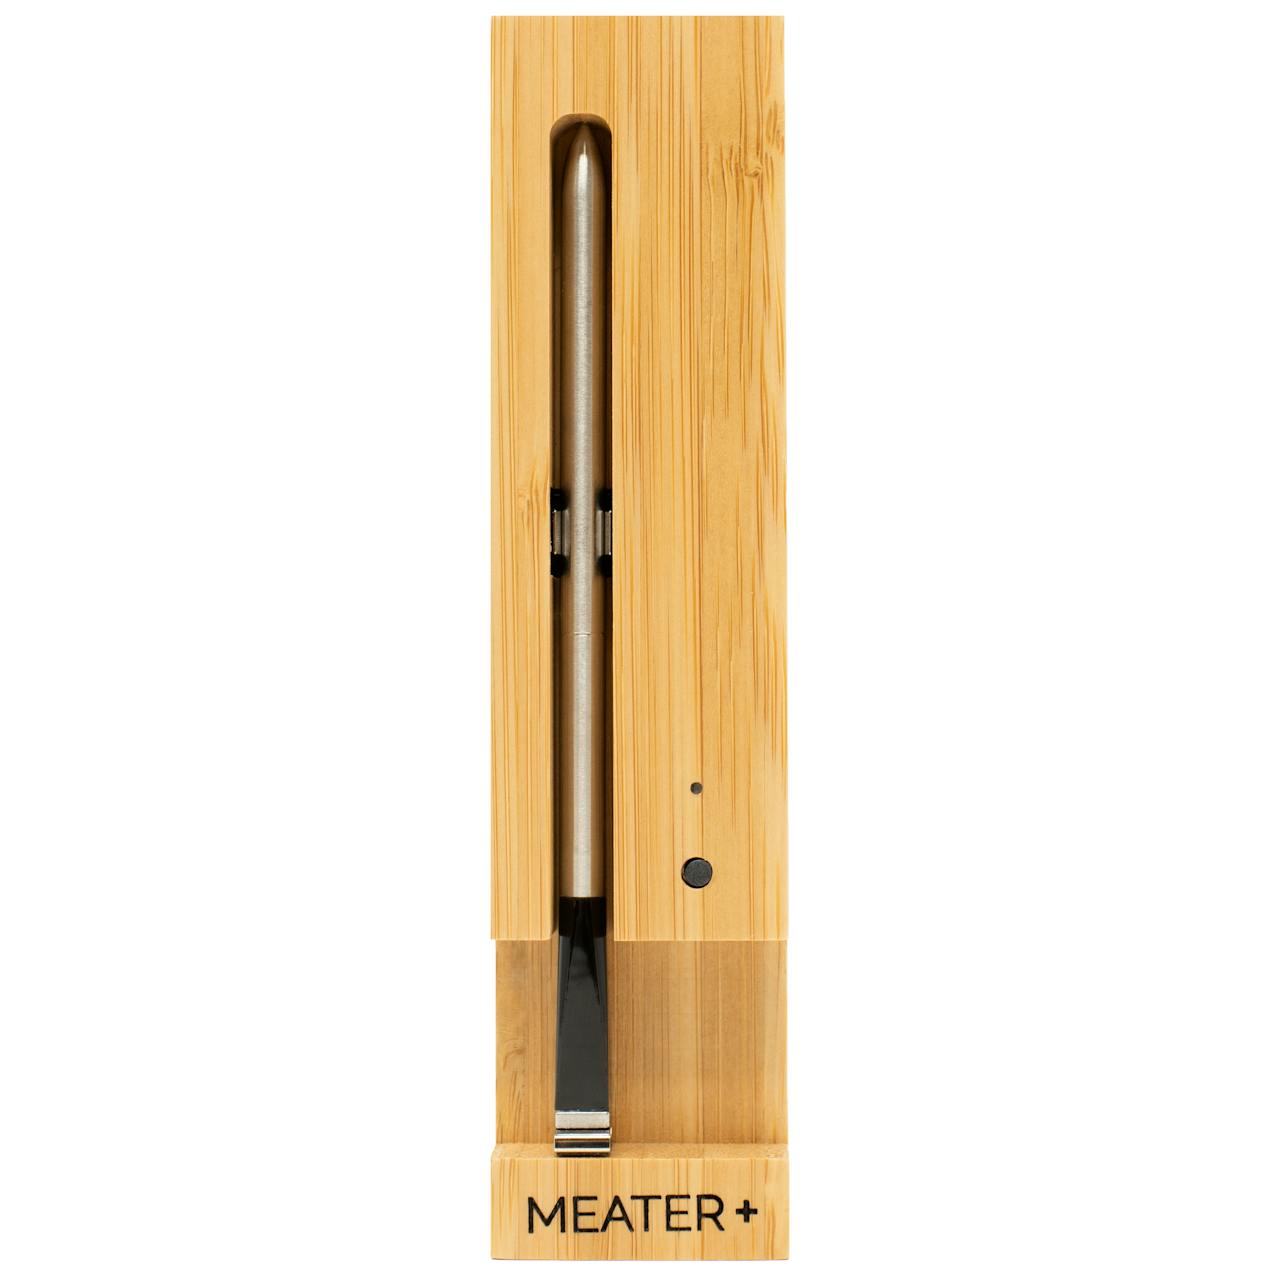 Meater Meater+ Wireless Thermometer